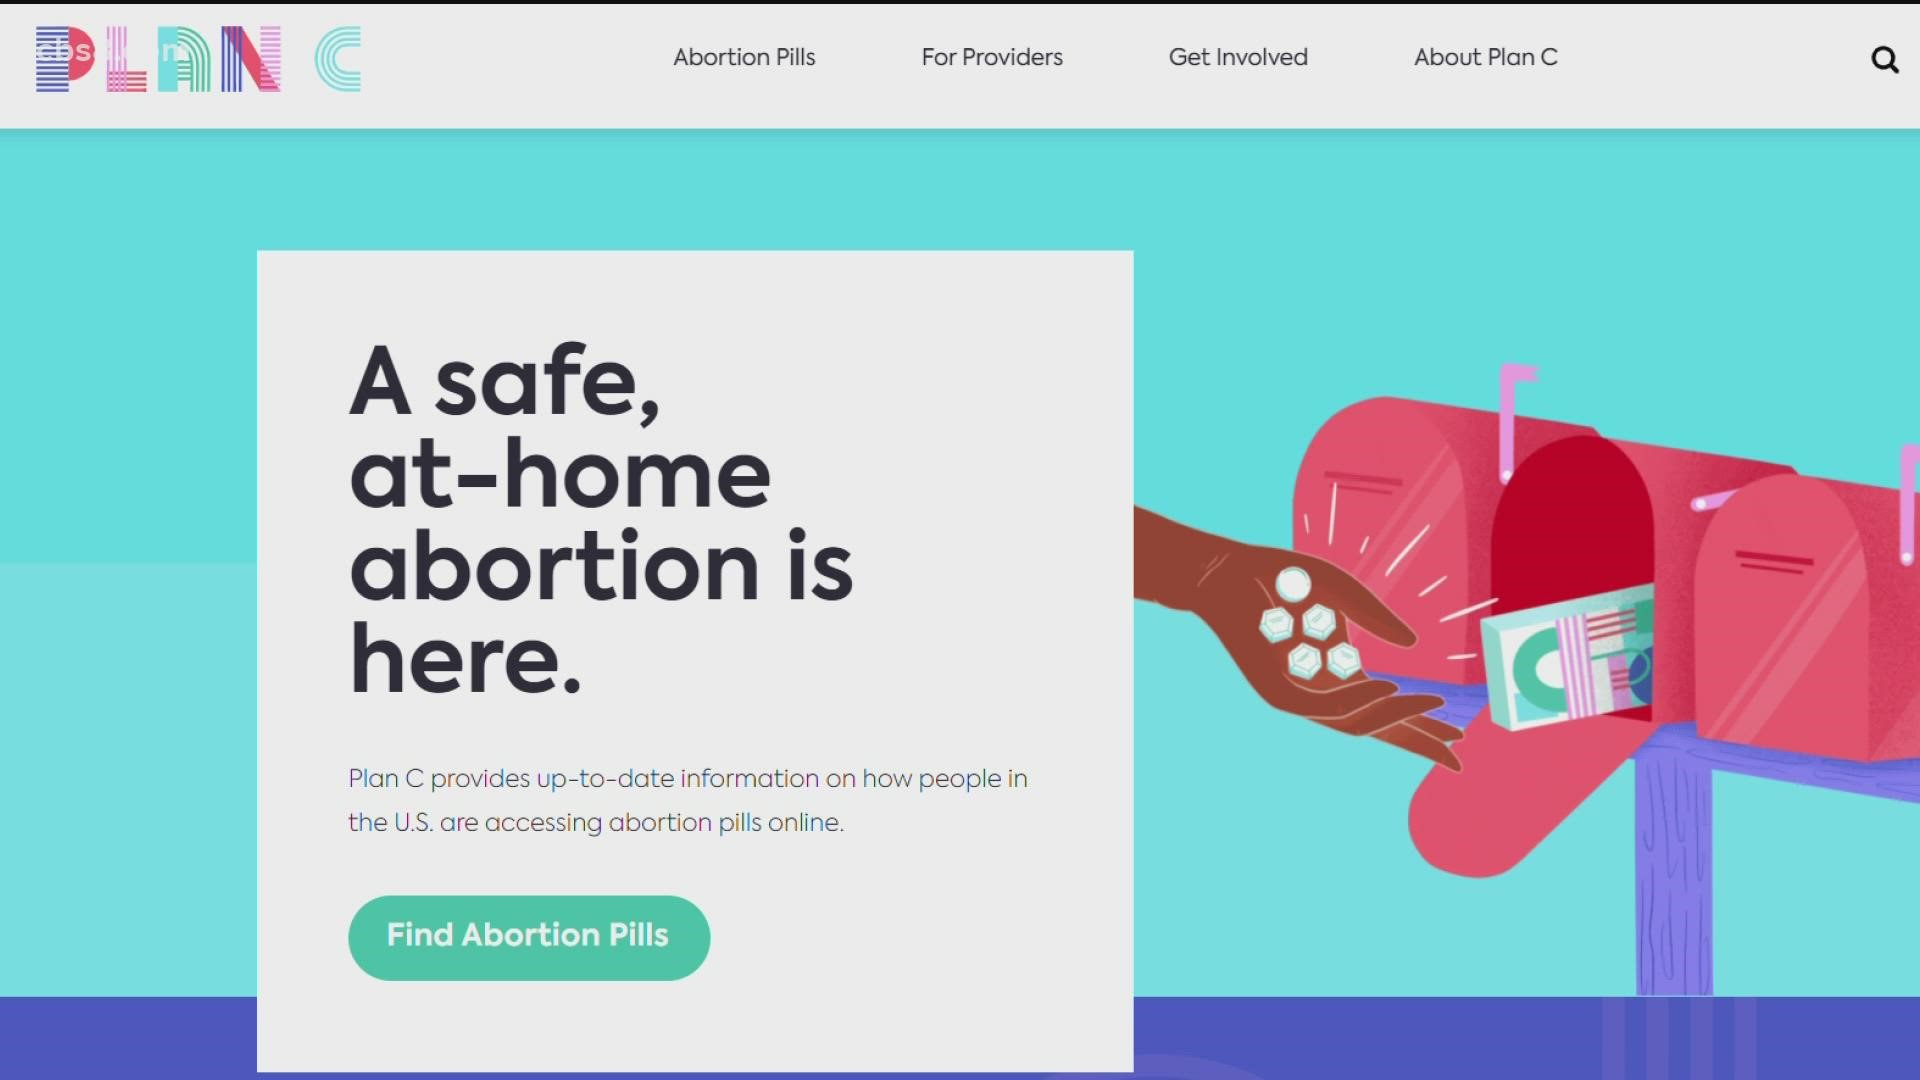 Plan C was launched in 2016 as a web-based guide to getting abortion pills and self-managed abortion in the United States.